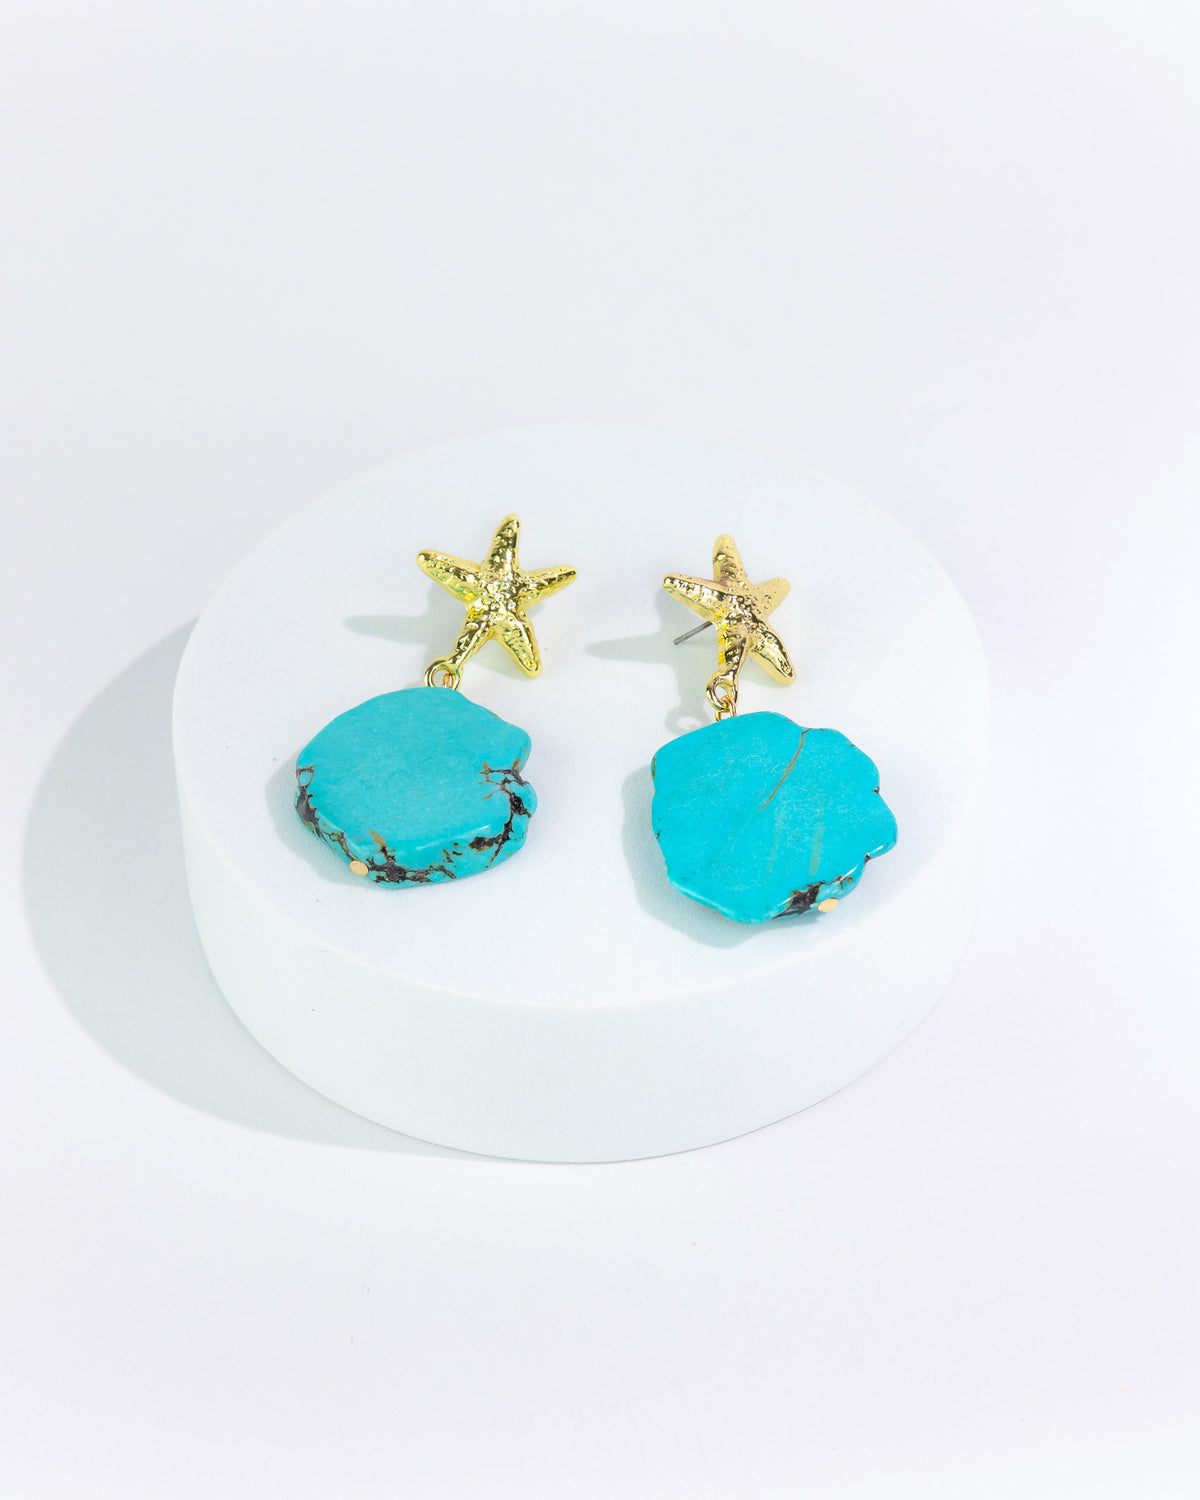 Dauplaise Jewelry - Turquoise on The Rocks Earrings